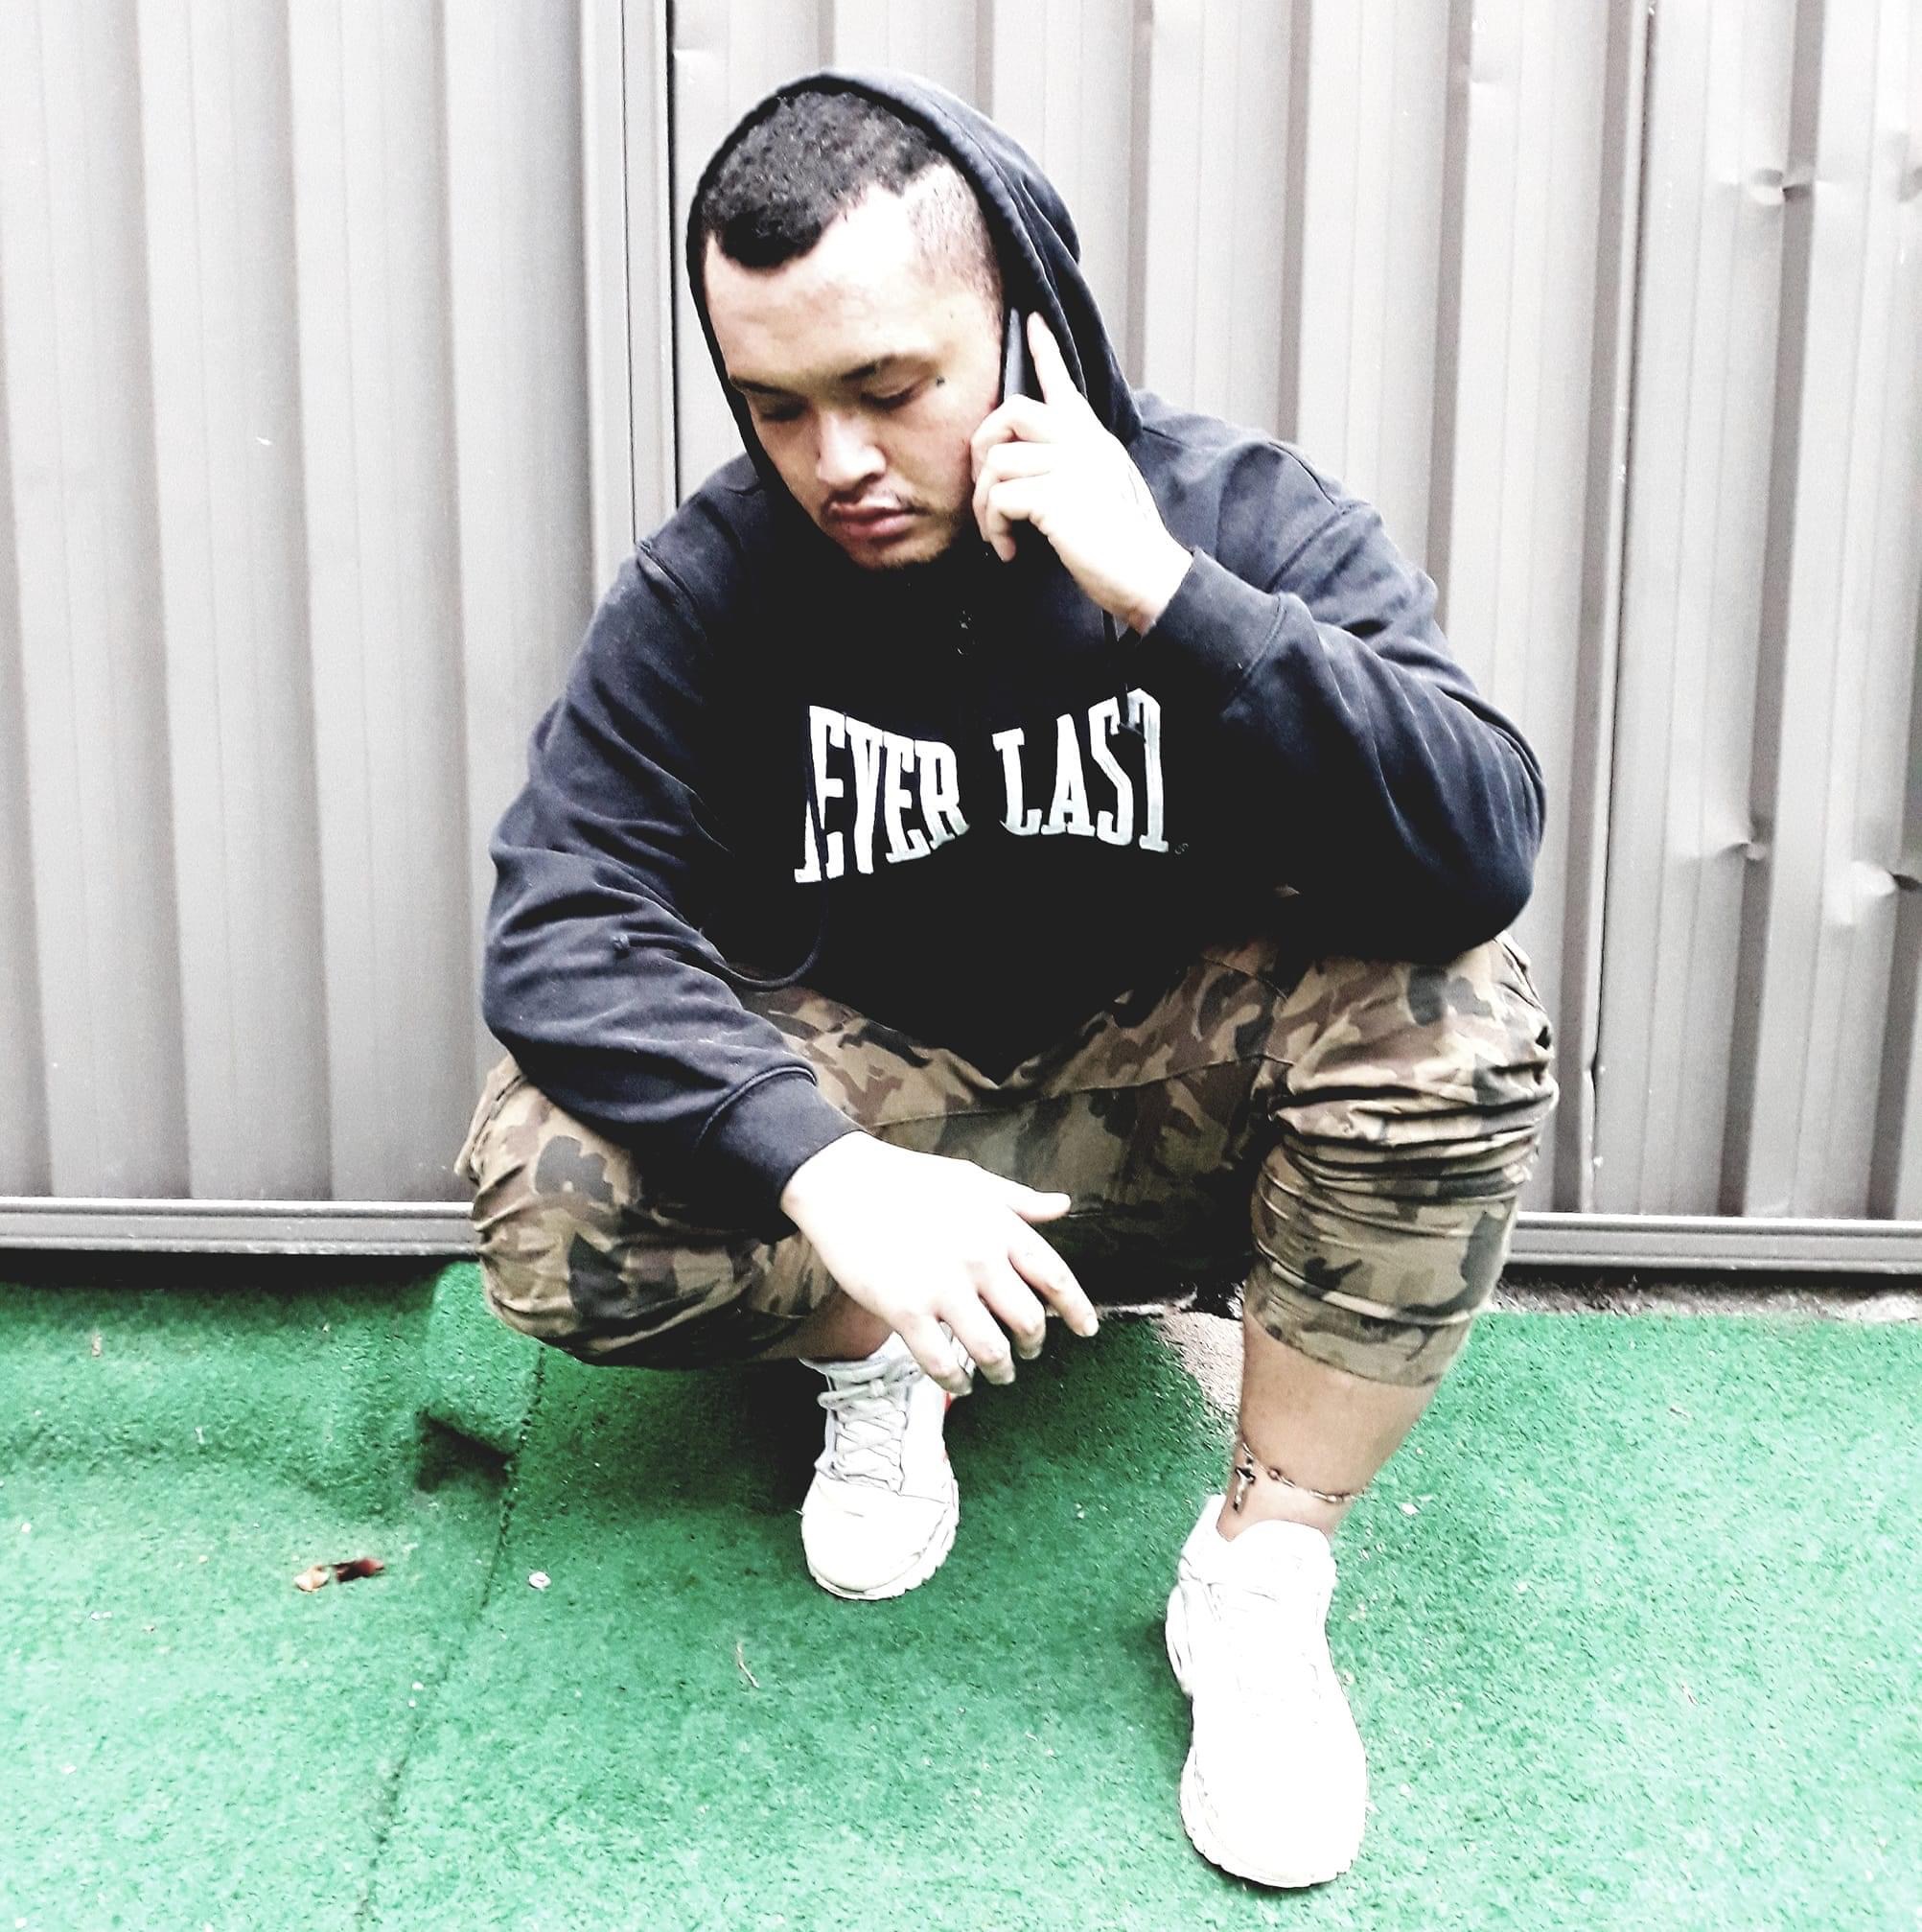 Australian Rapper, USTA Coming from Down Under to Deliver